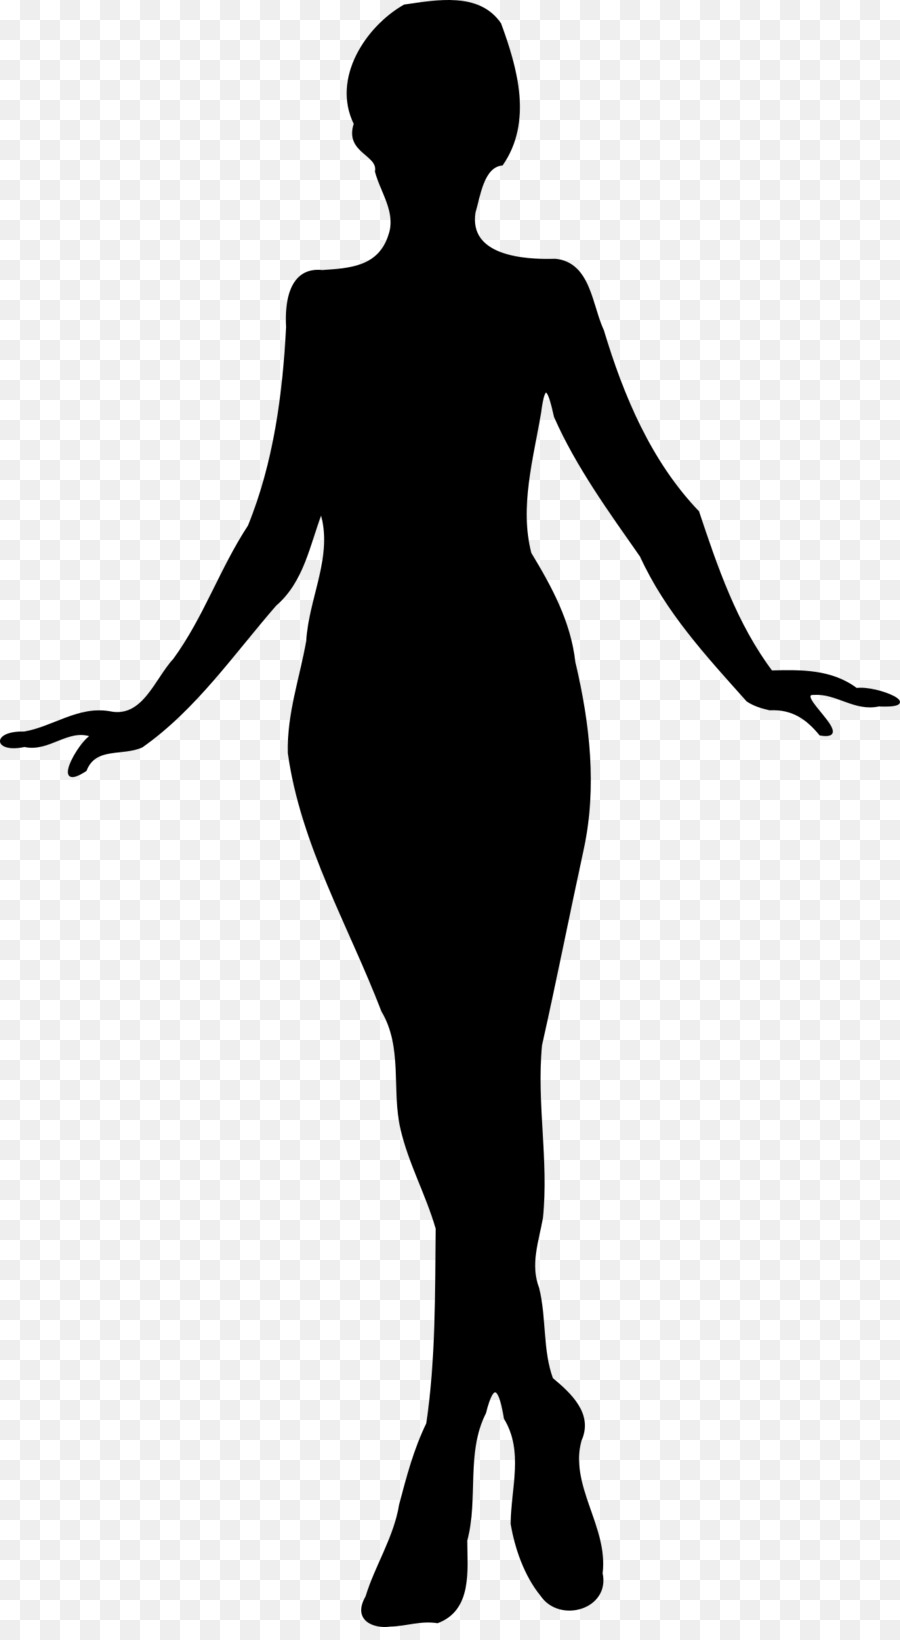 Drawing Child Clip art - Lady Silhouette png download - 1328*2400 - Free Transparent Drawing png Download.